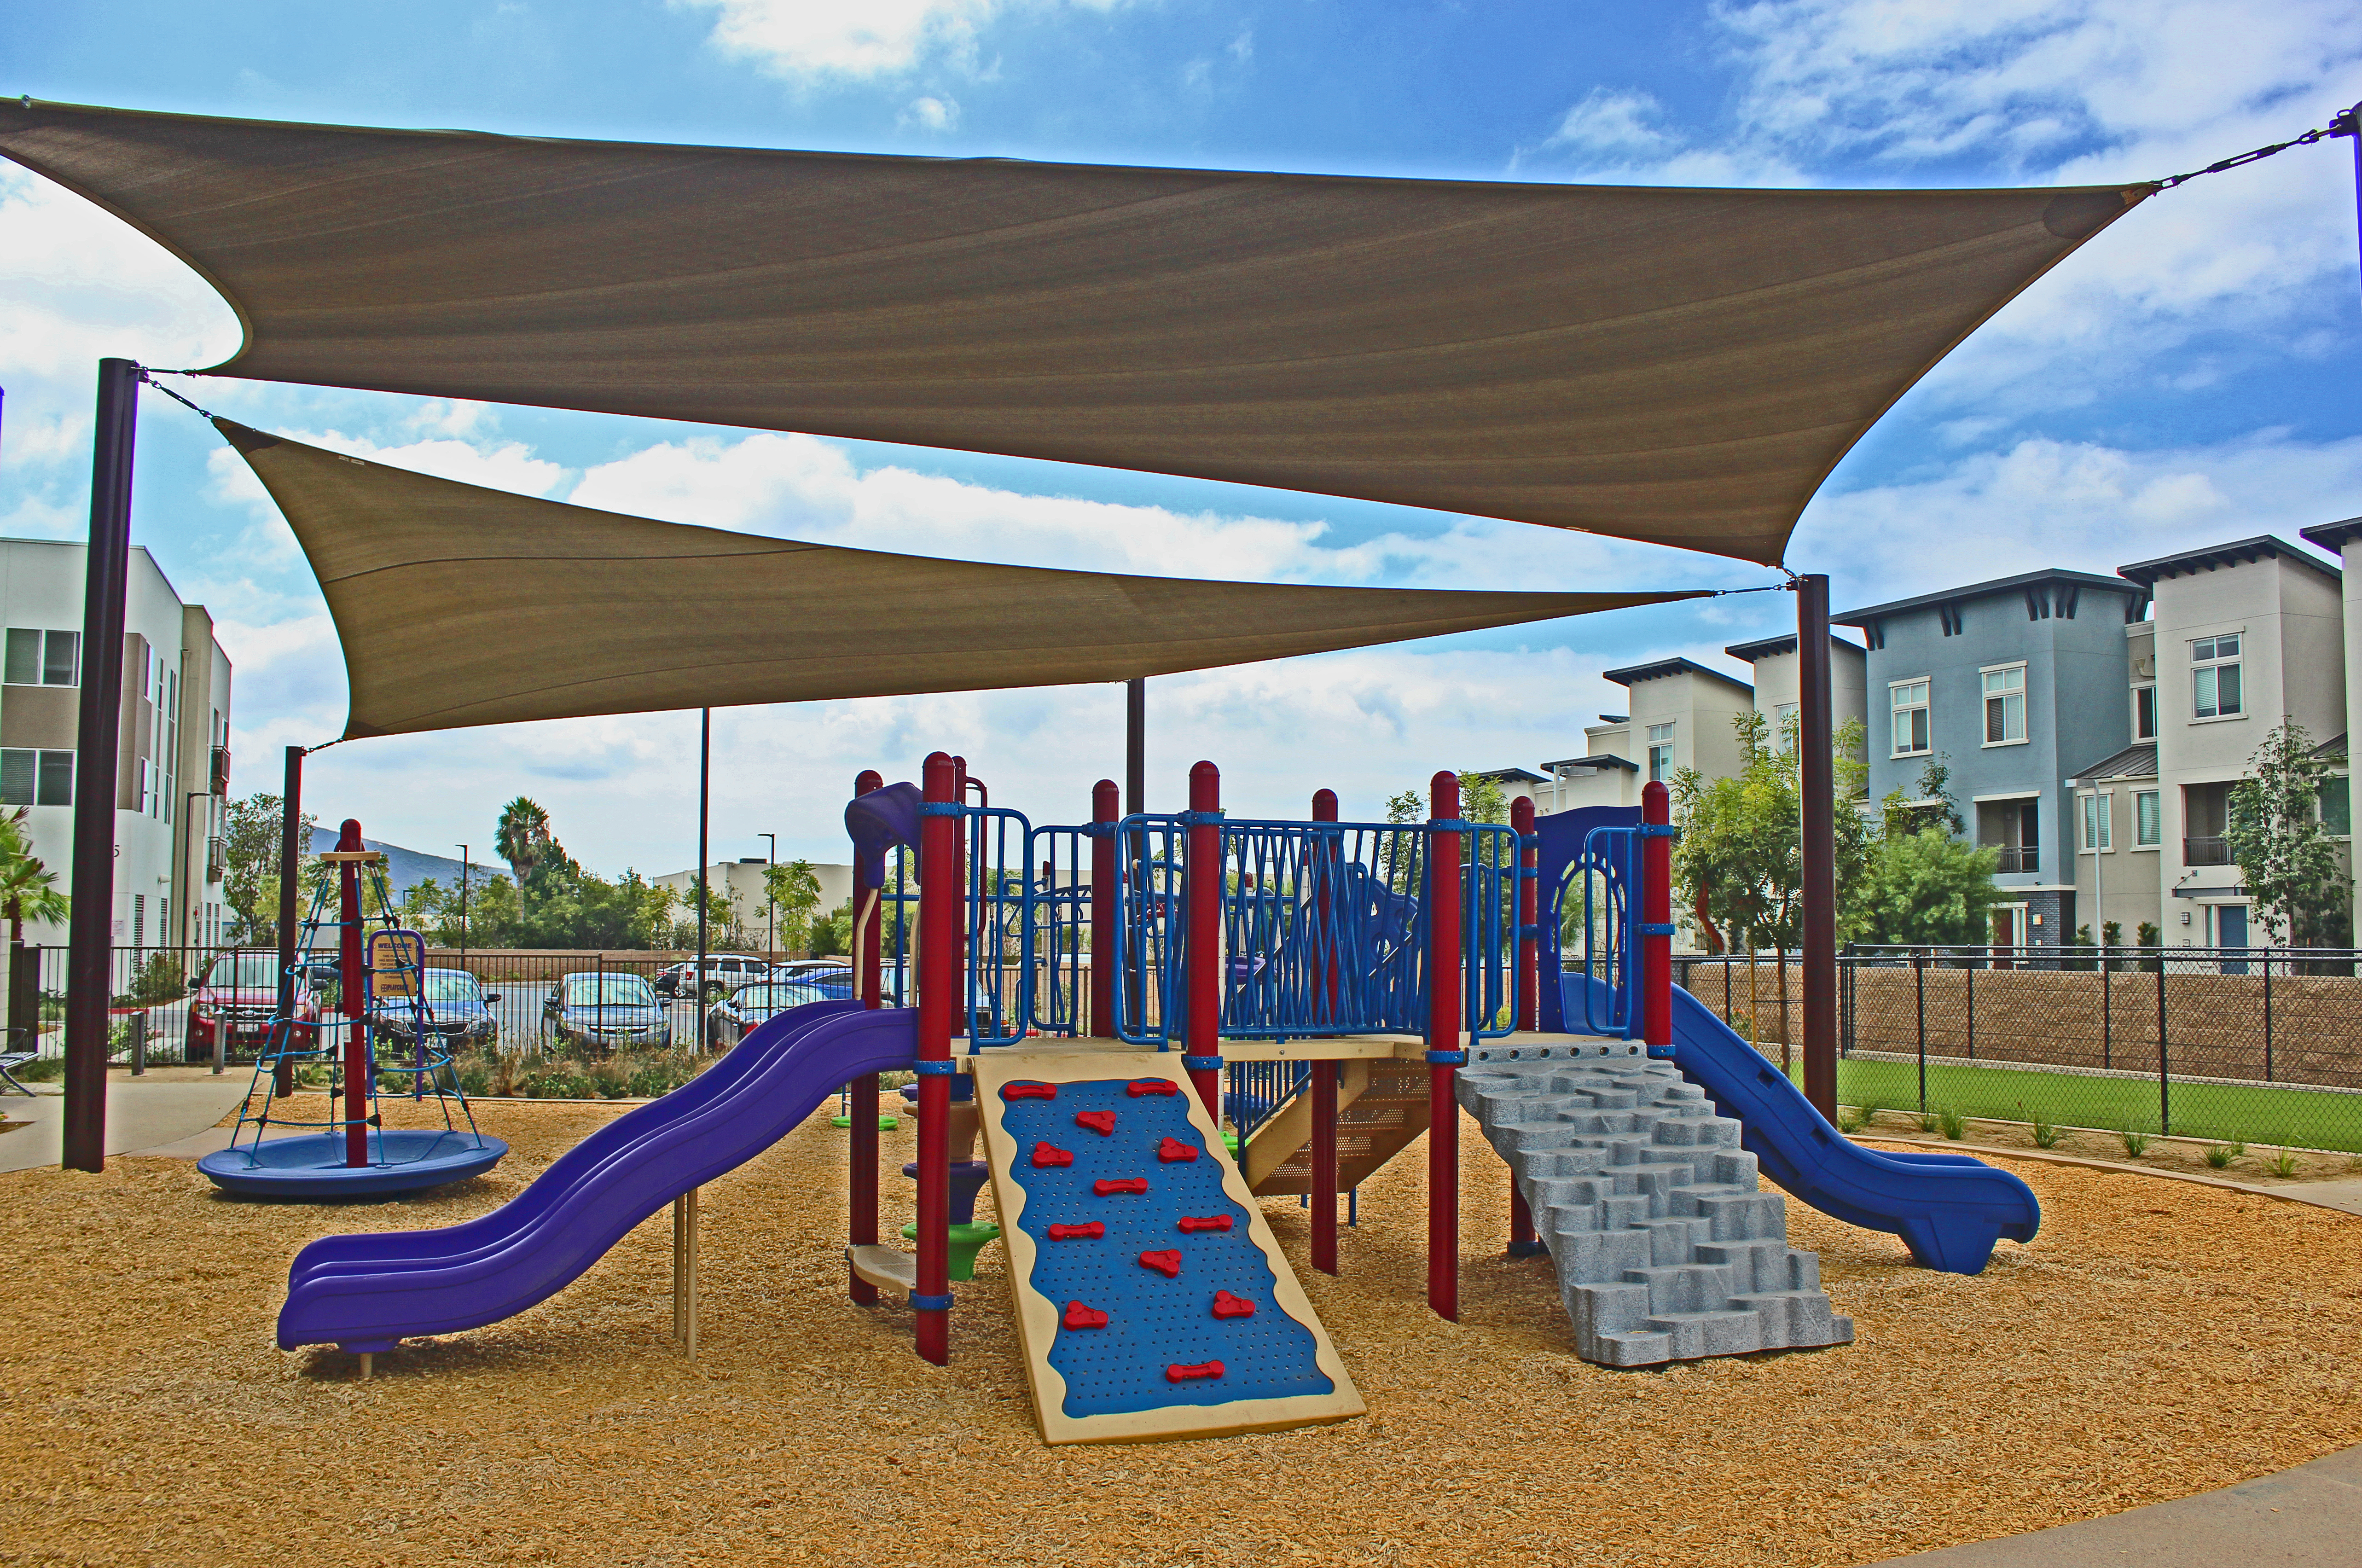 Customized playground equipment suited for Davia Park